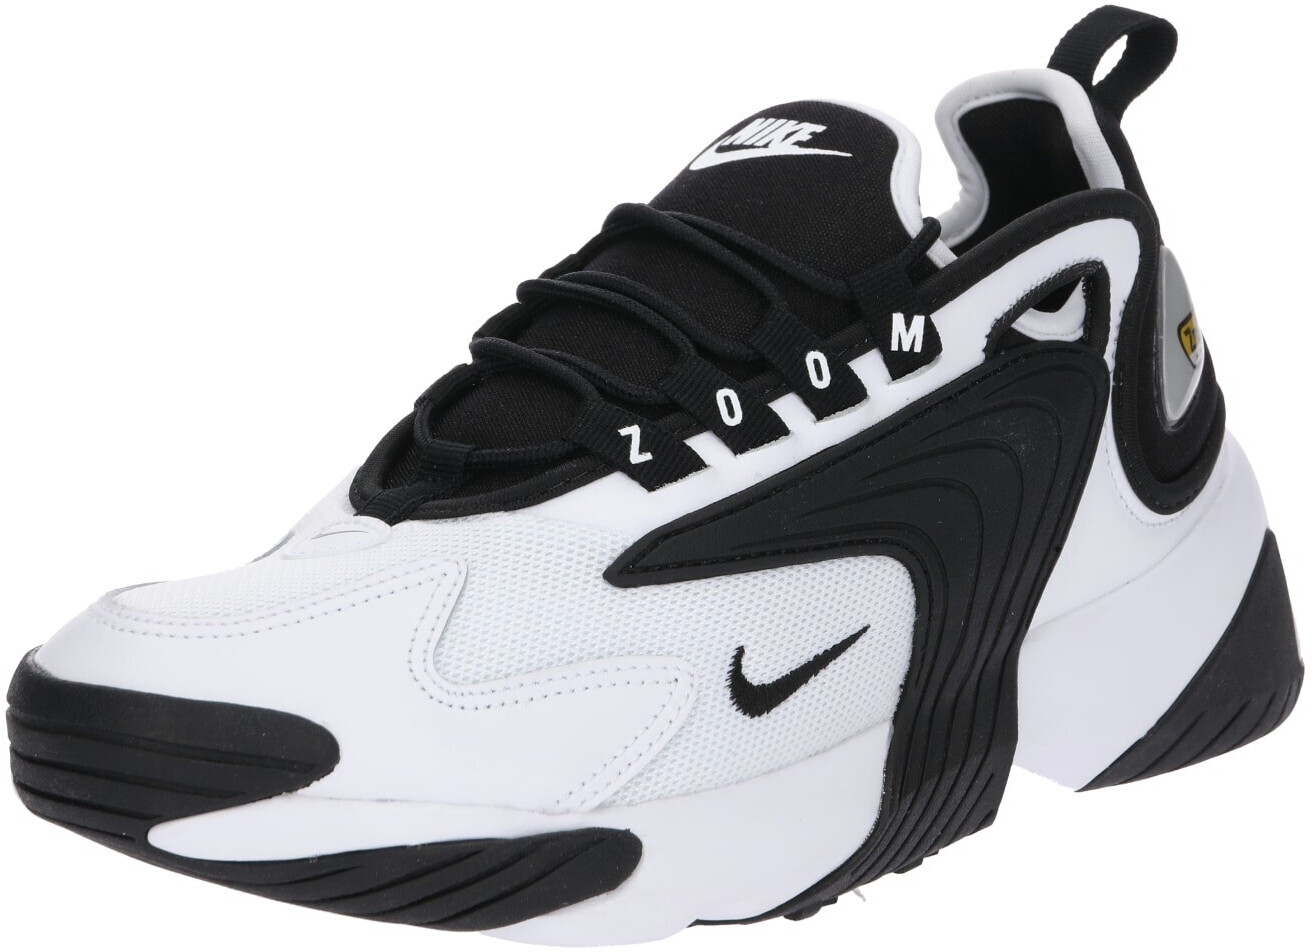 nike zoom 2k sneakers in black and gold